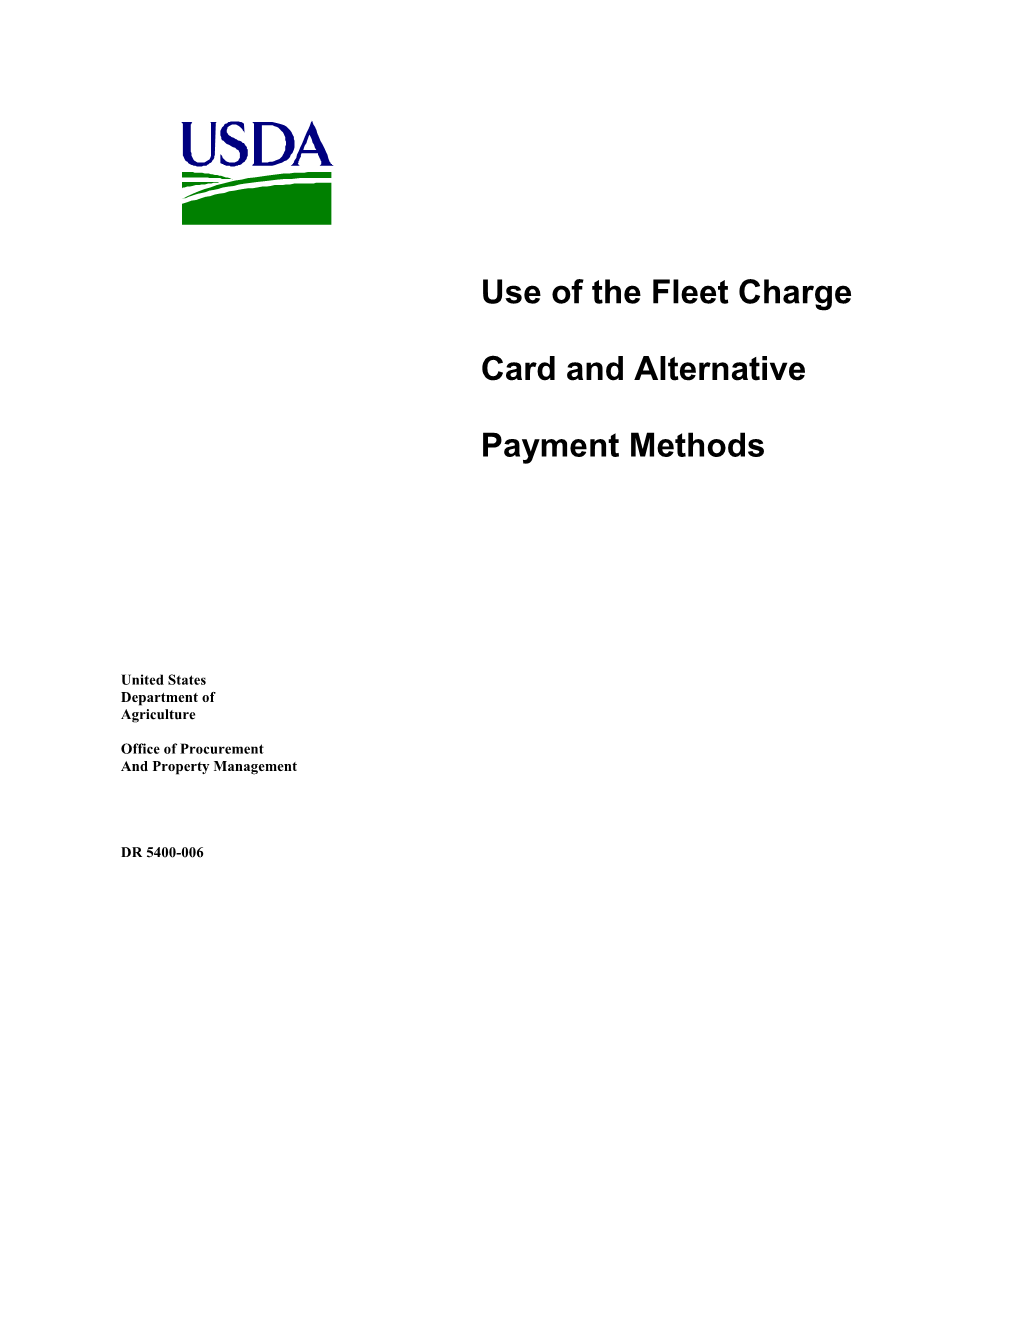 Use of the Fleet Charge Card and Alternative Payment Methods